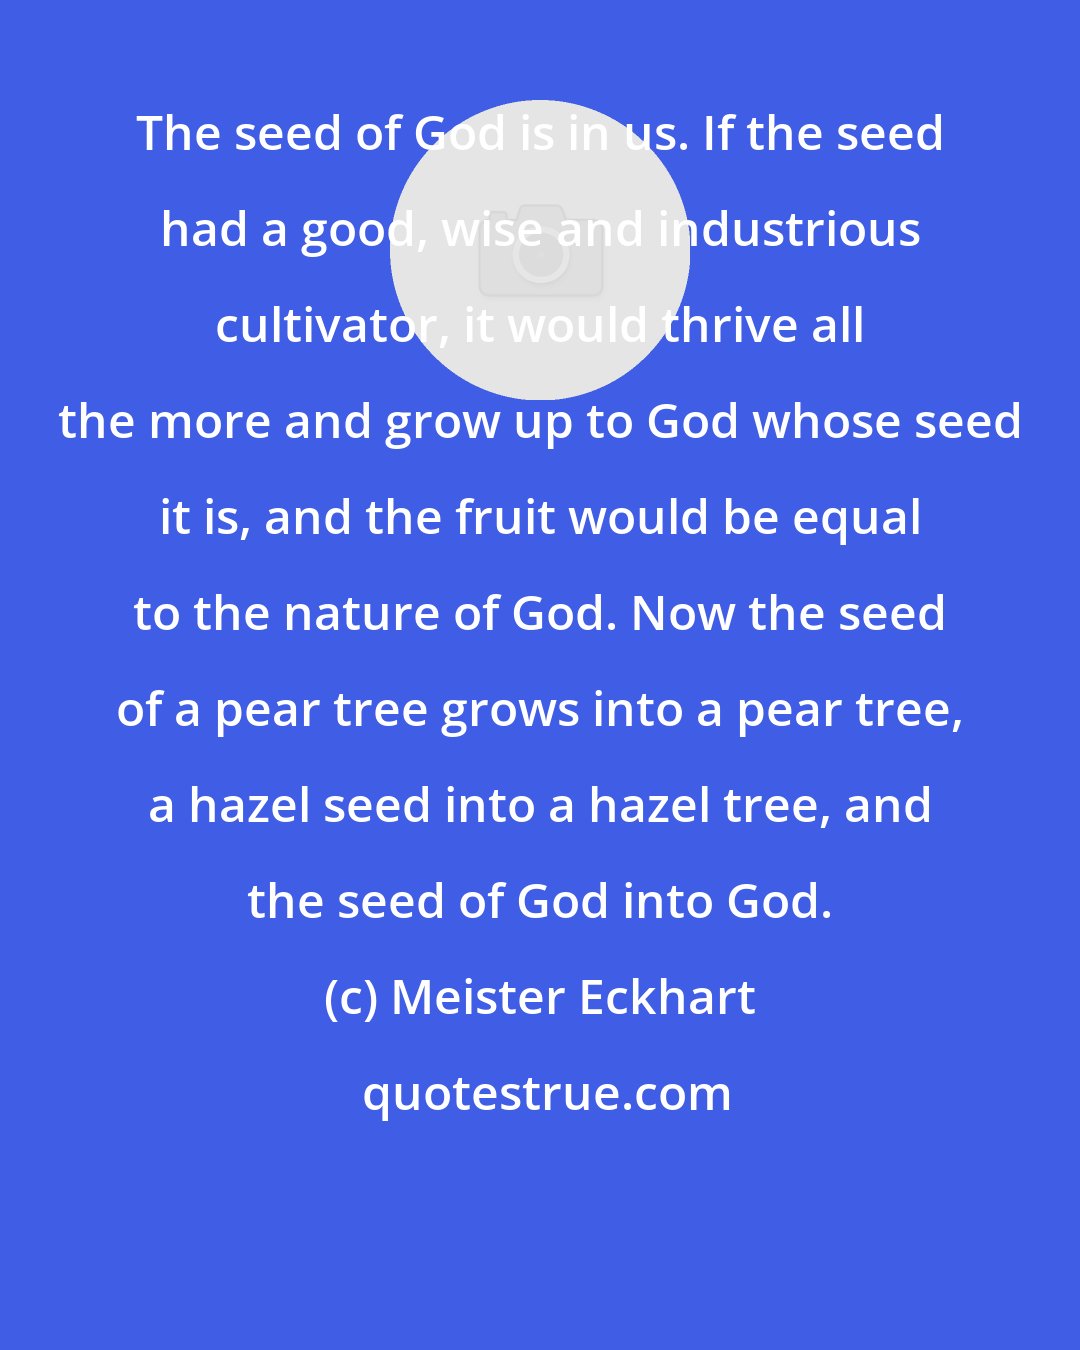 Meister Eckhart: The seed of God is in us. If the seed had a good, wise and industrious cultivator, it would thrive all the more and grow up to God whose seed it is, and the fruit would be equal to the nature of God. Now the seed of a pear tree grows into a pear tree, a hazel seed into a hazel tree, and the seed of God into God.